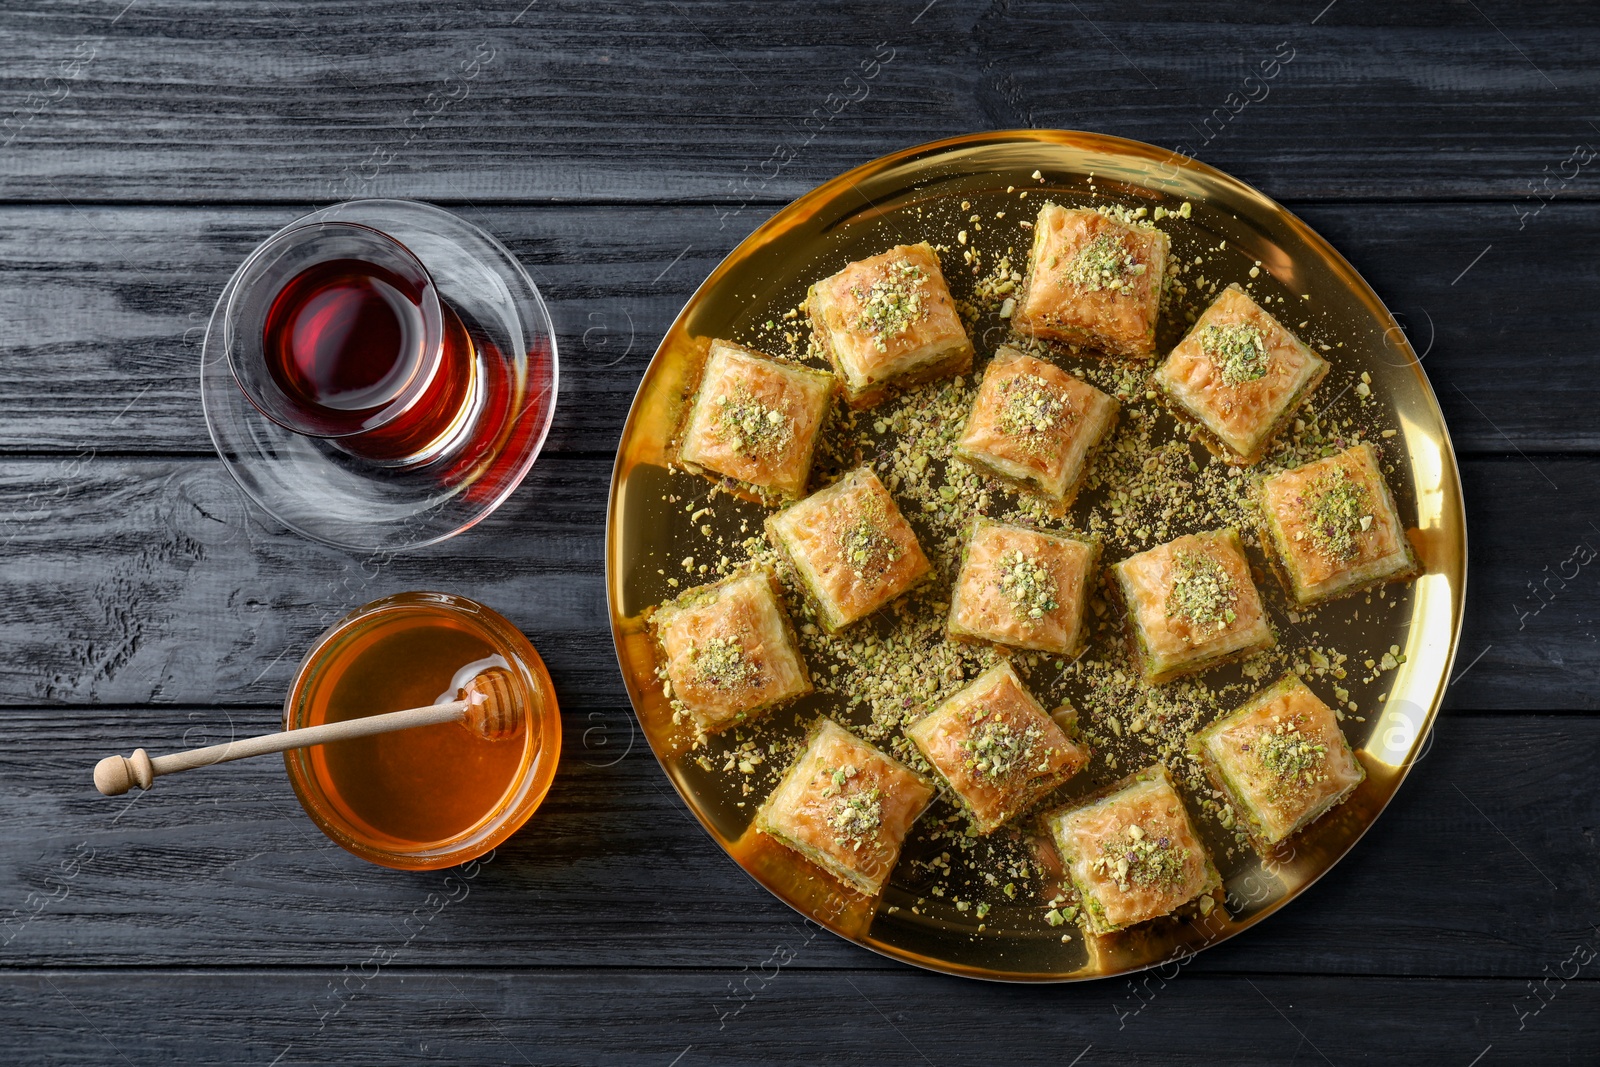 Photo of Delicious fresh baklava with chopped nuts served on black wooden table, flat lay. Eastern sweets